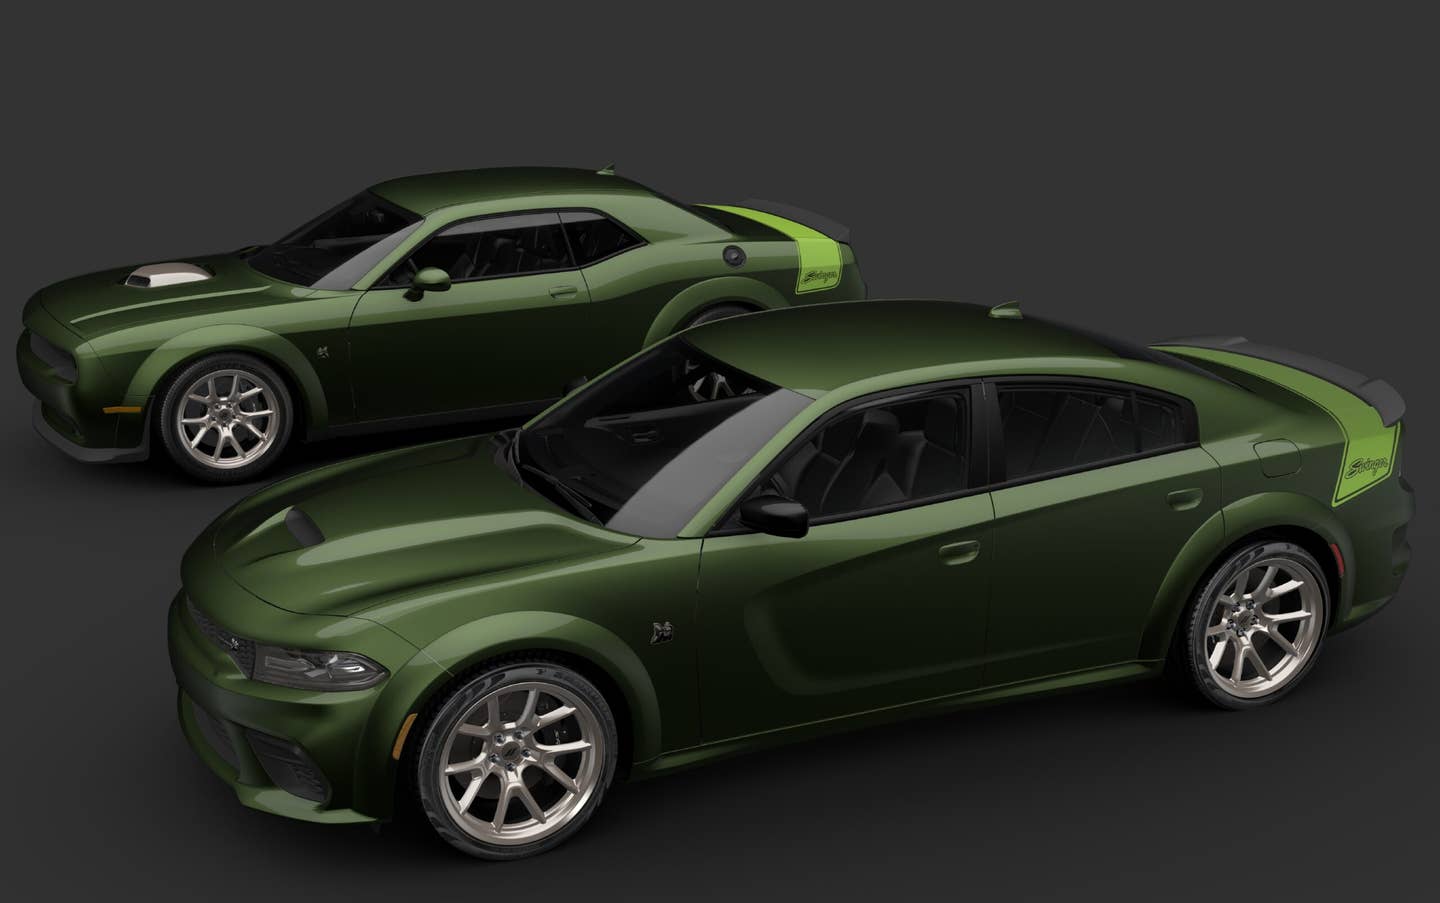 A pair of modern-day “Swingers” with a retro-themed appearance are joining the Dodge brand’s “Last Call.” The special-edition 2023 Dodge Challenger R/T Scat Pack Swinger (rear) and 2023 Dodge Charger R/T Scat Pack Swinger models (both shown in F8 Green) give a nod back to the unique style of the Dodge brand’s “swinging” muscle car lineup of the late 1960s and early 1970s.